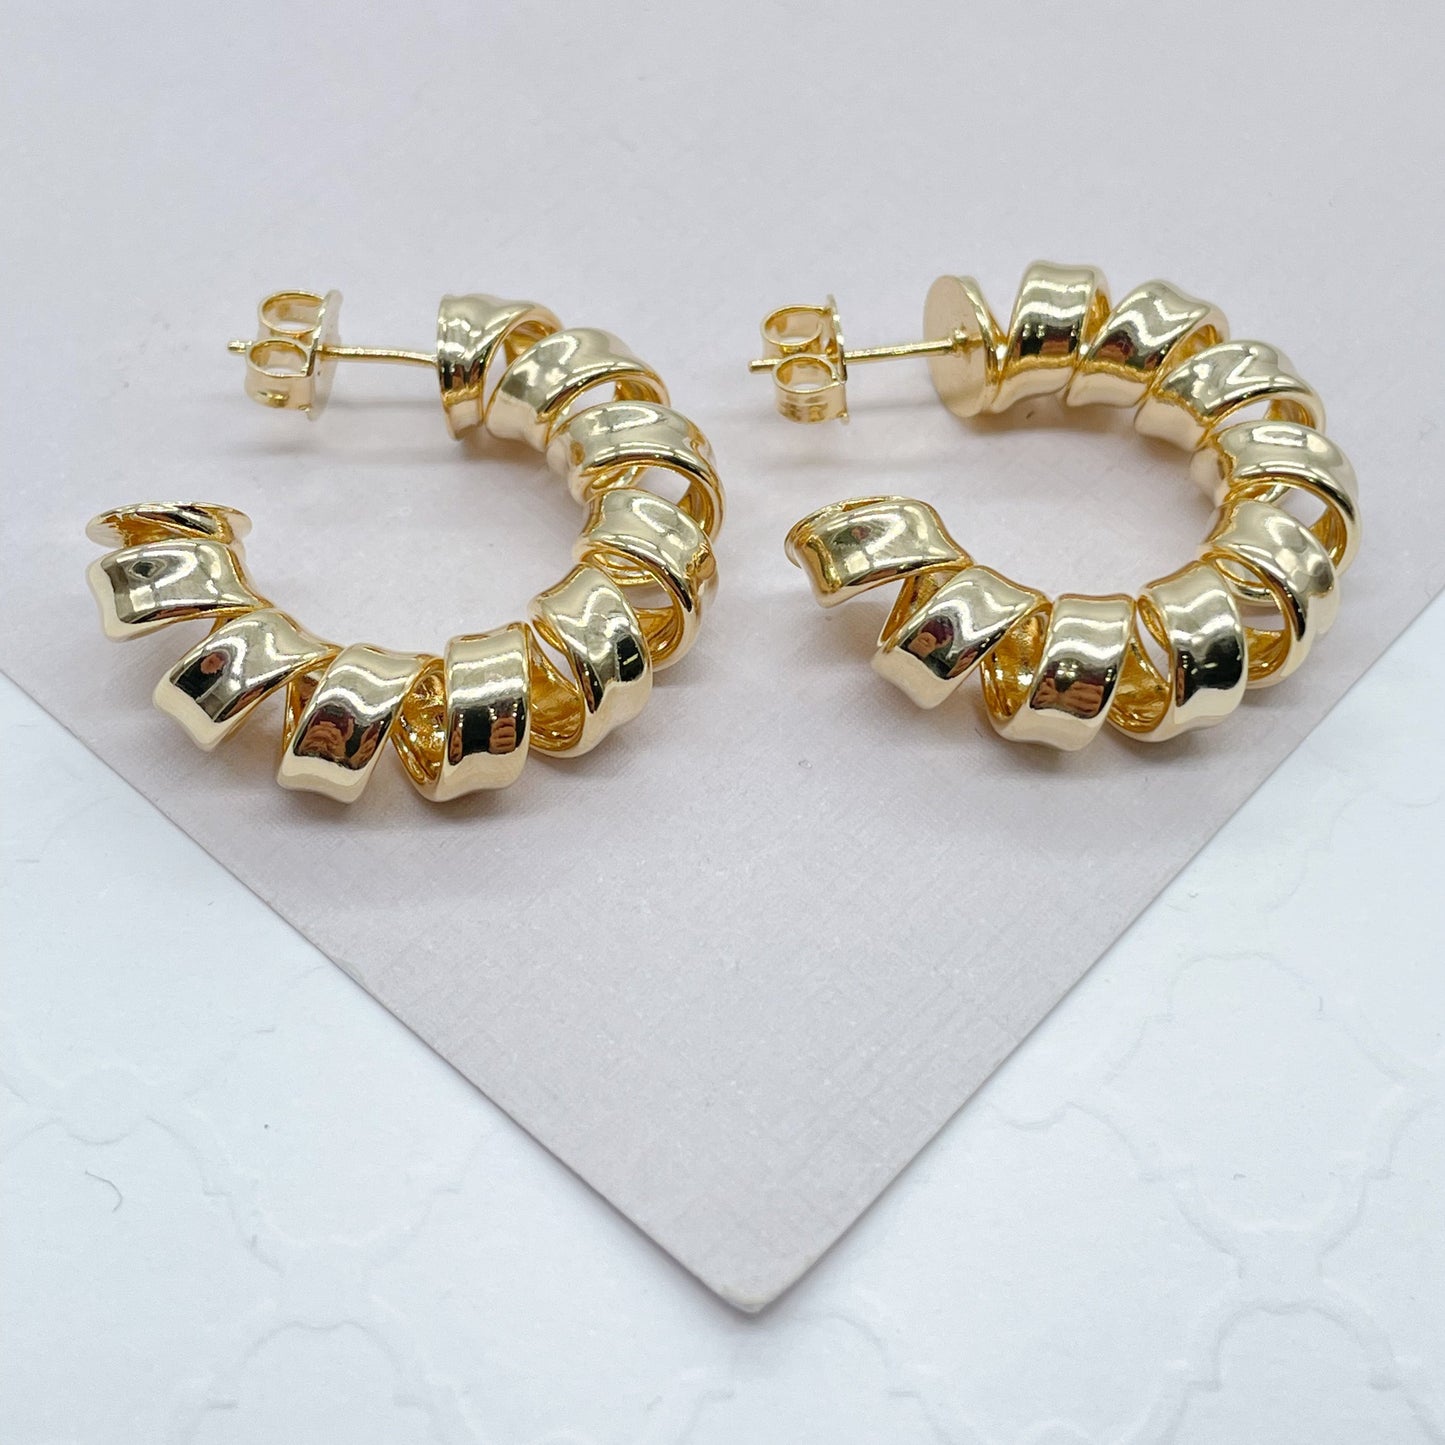 New - 18k Gold Layered smooth Curled Hoops